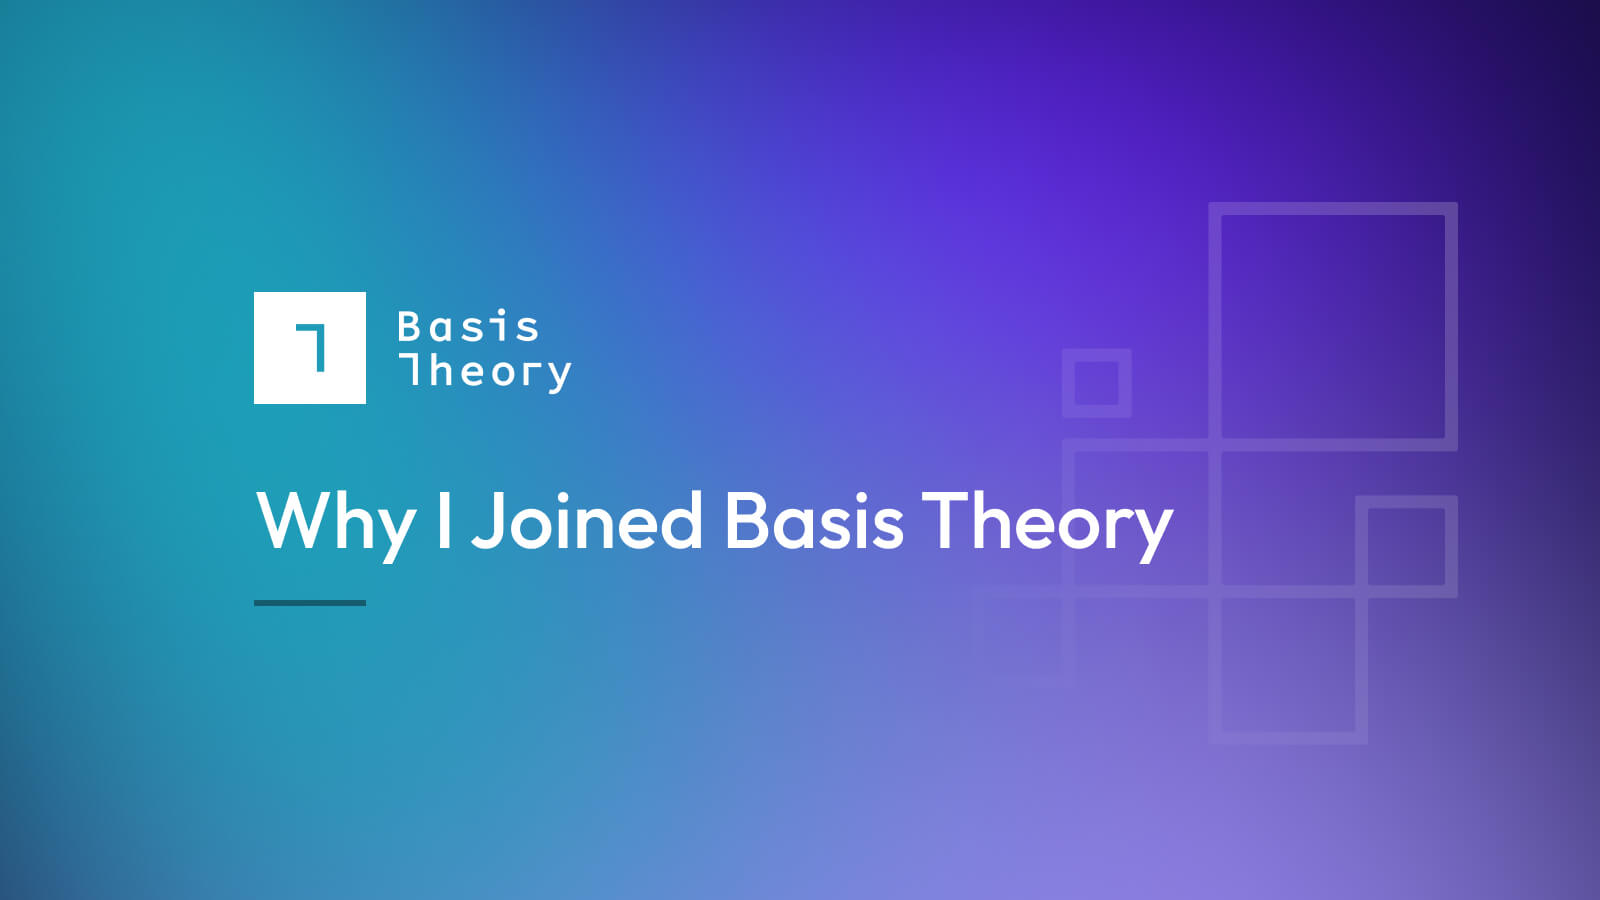 Why I joined Basis Theory